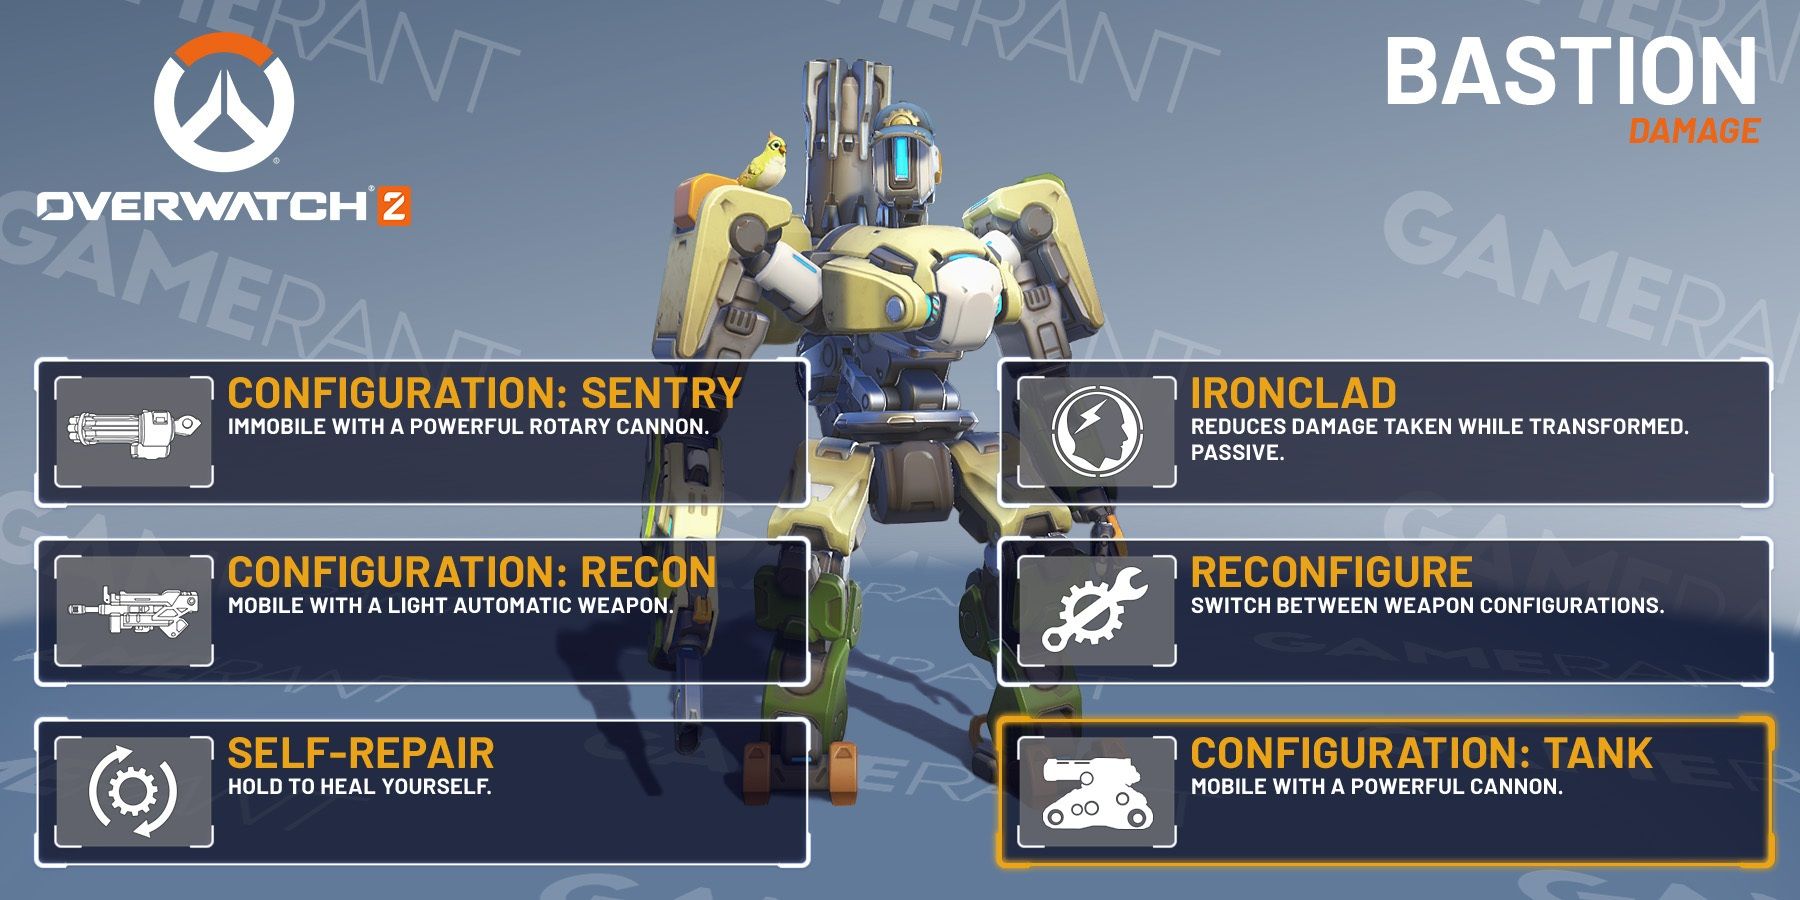 Overwatch 2: Bastion Guide (Tips, Abilities, And More)